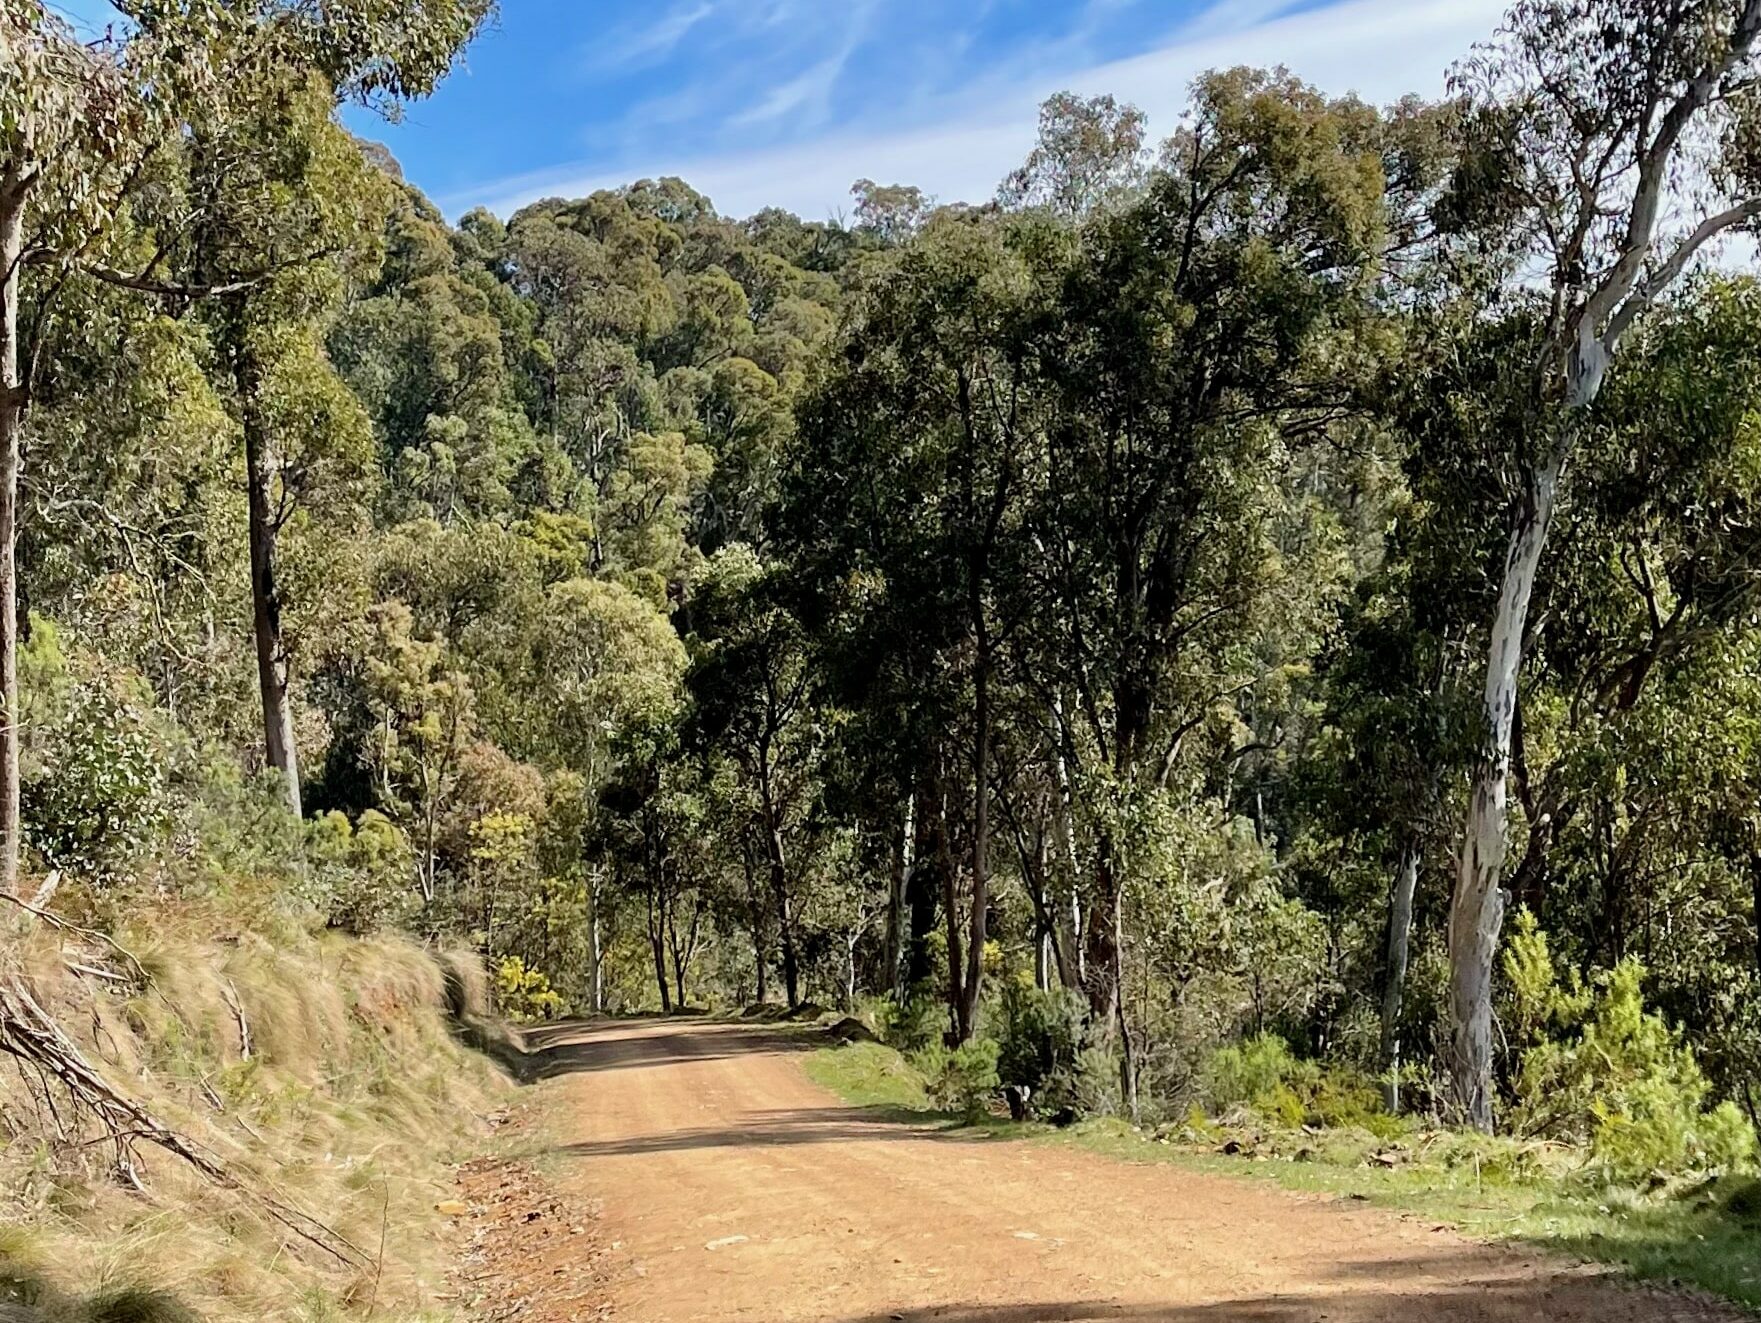 Gravel road surrounded by native forest on a sunny day